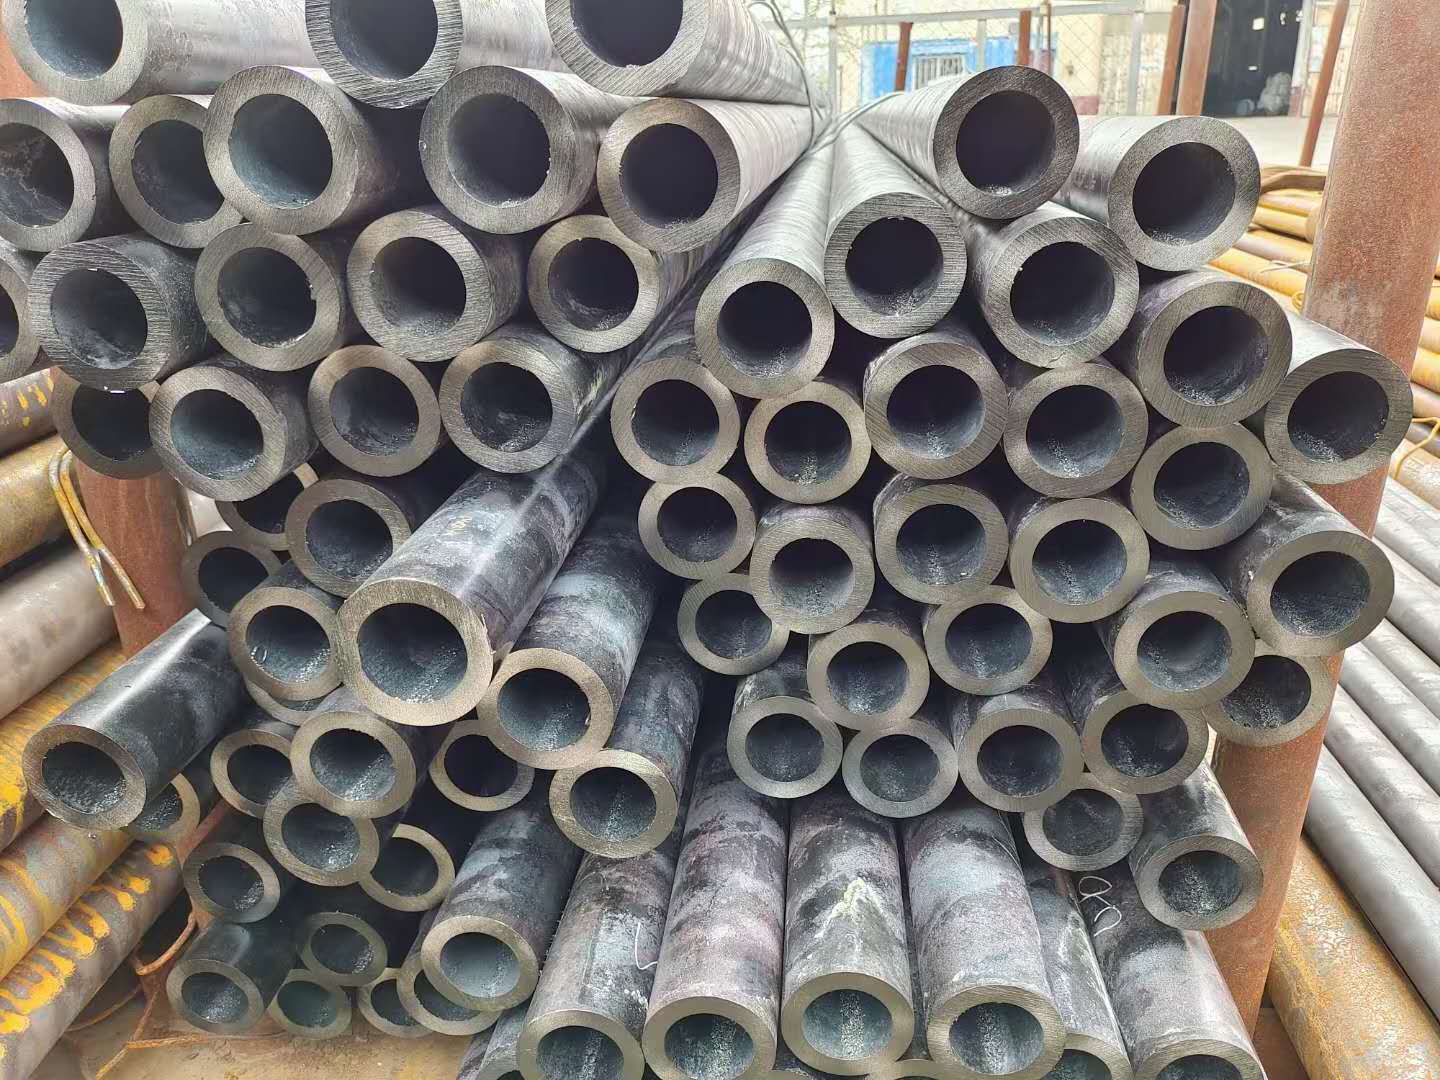 Discuss the significance of machined steel pipe and structural steel pipe (2)